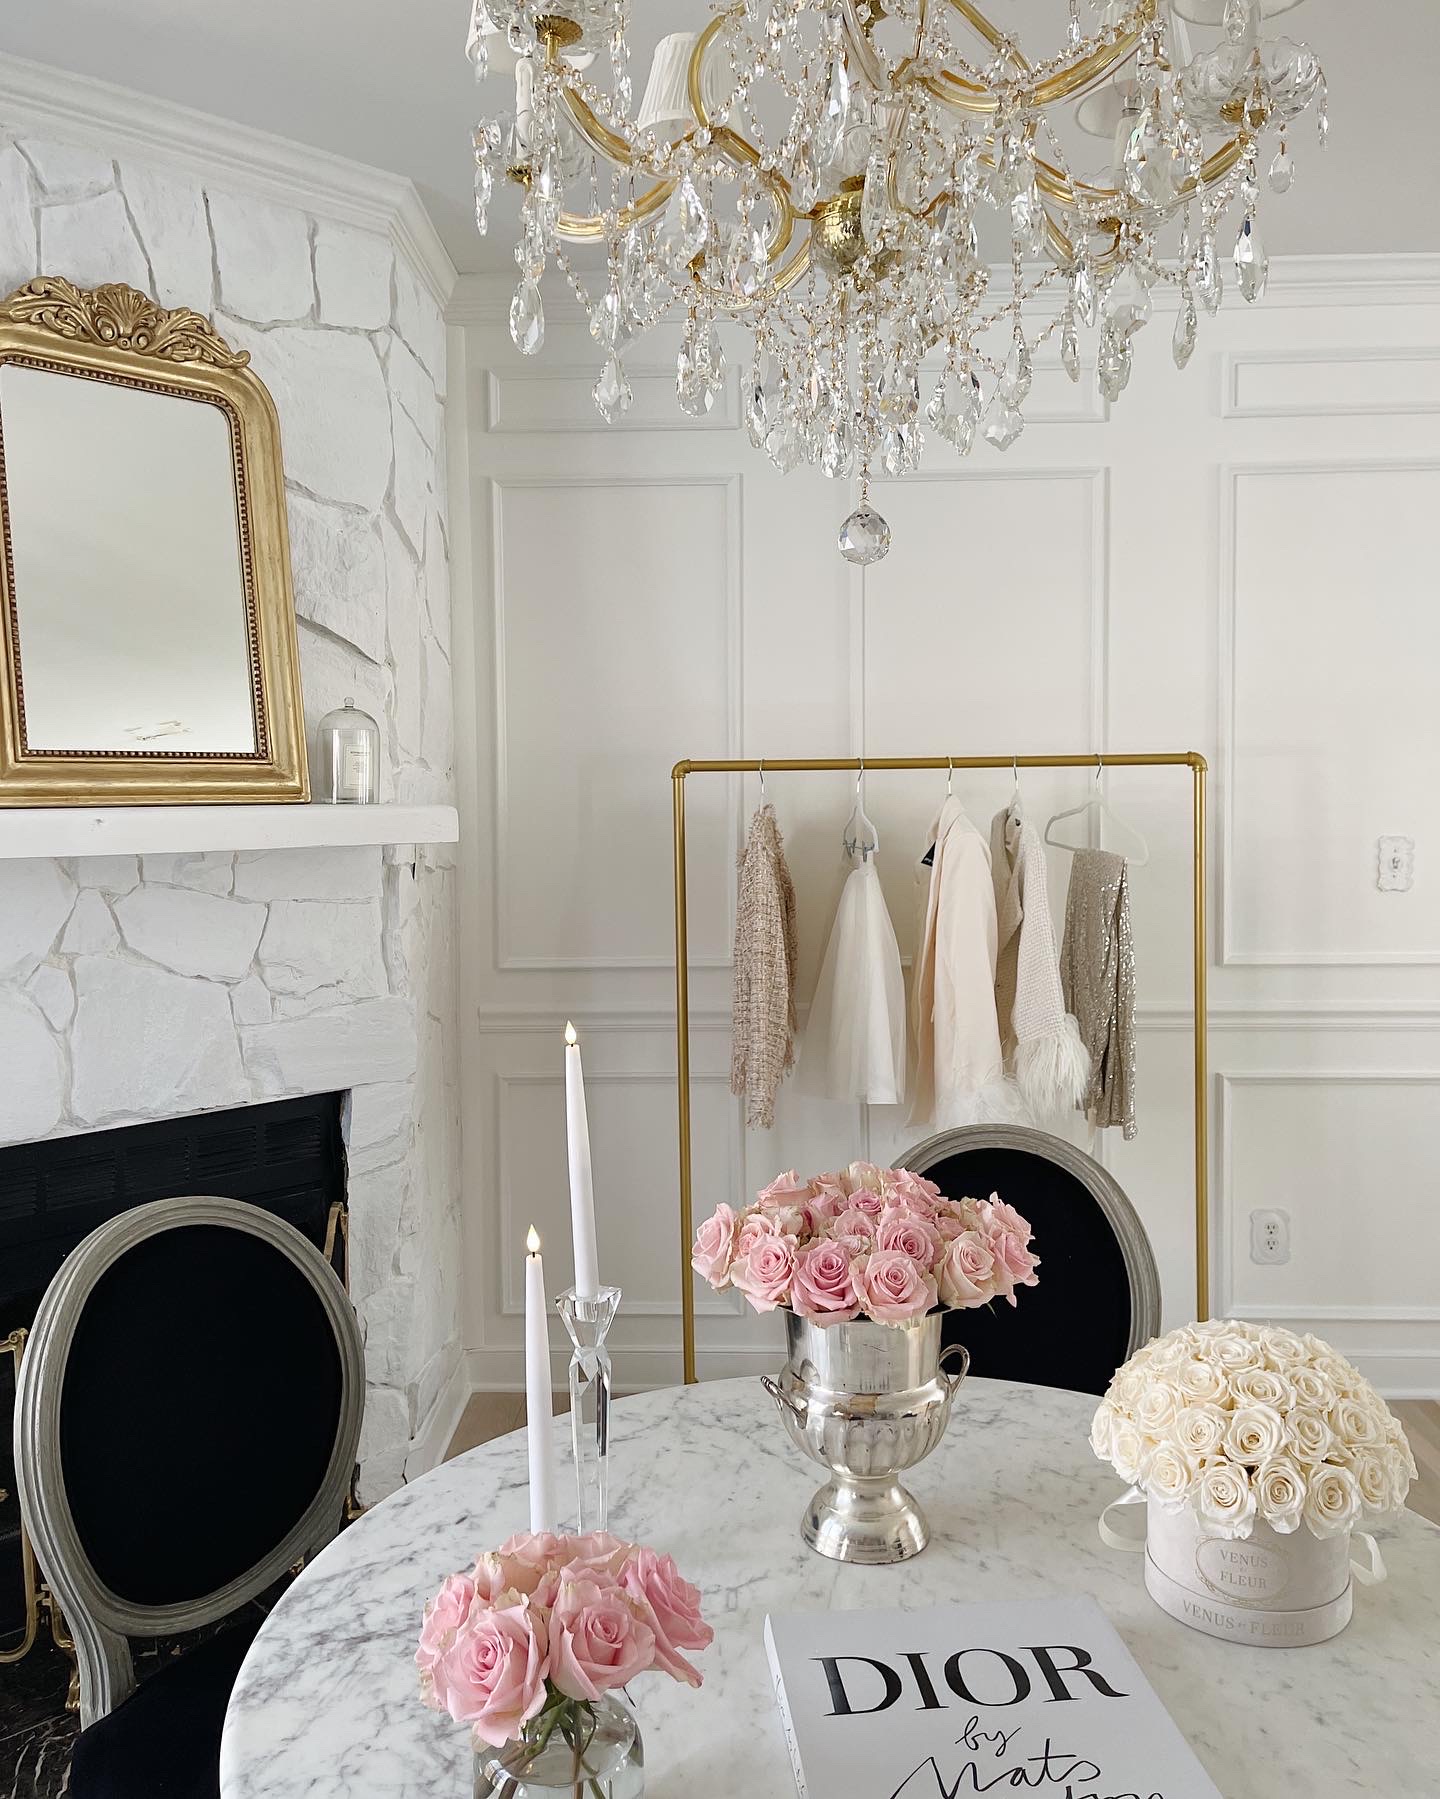 Be Our Guest – The dining space – J'adore Lexie Couture